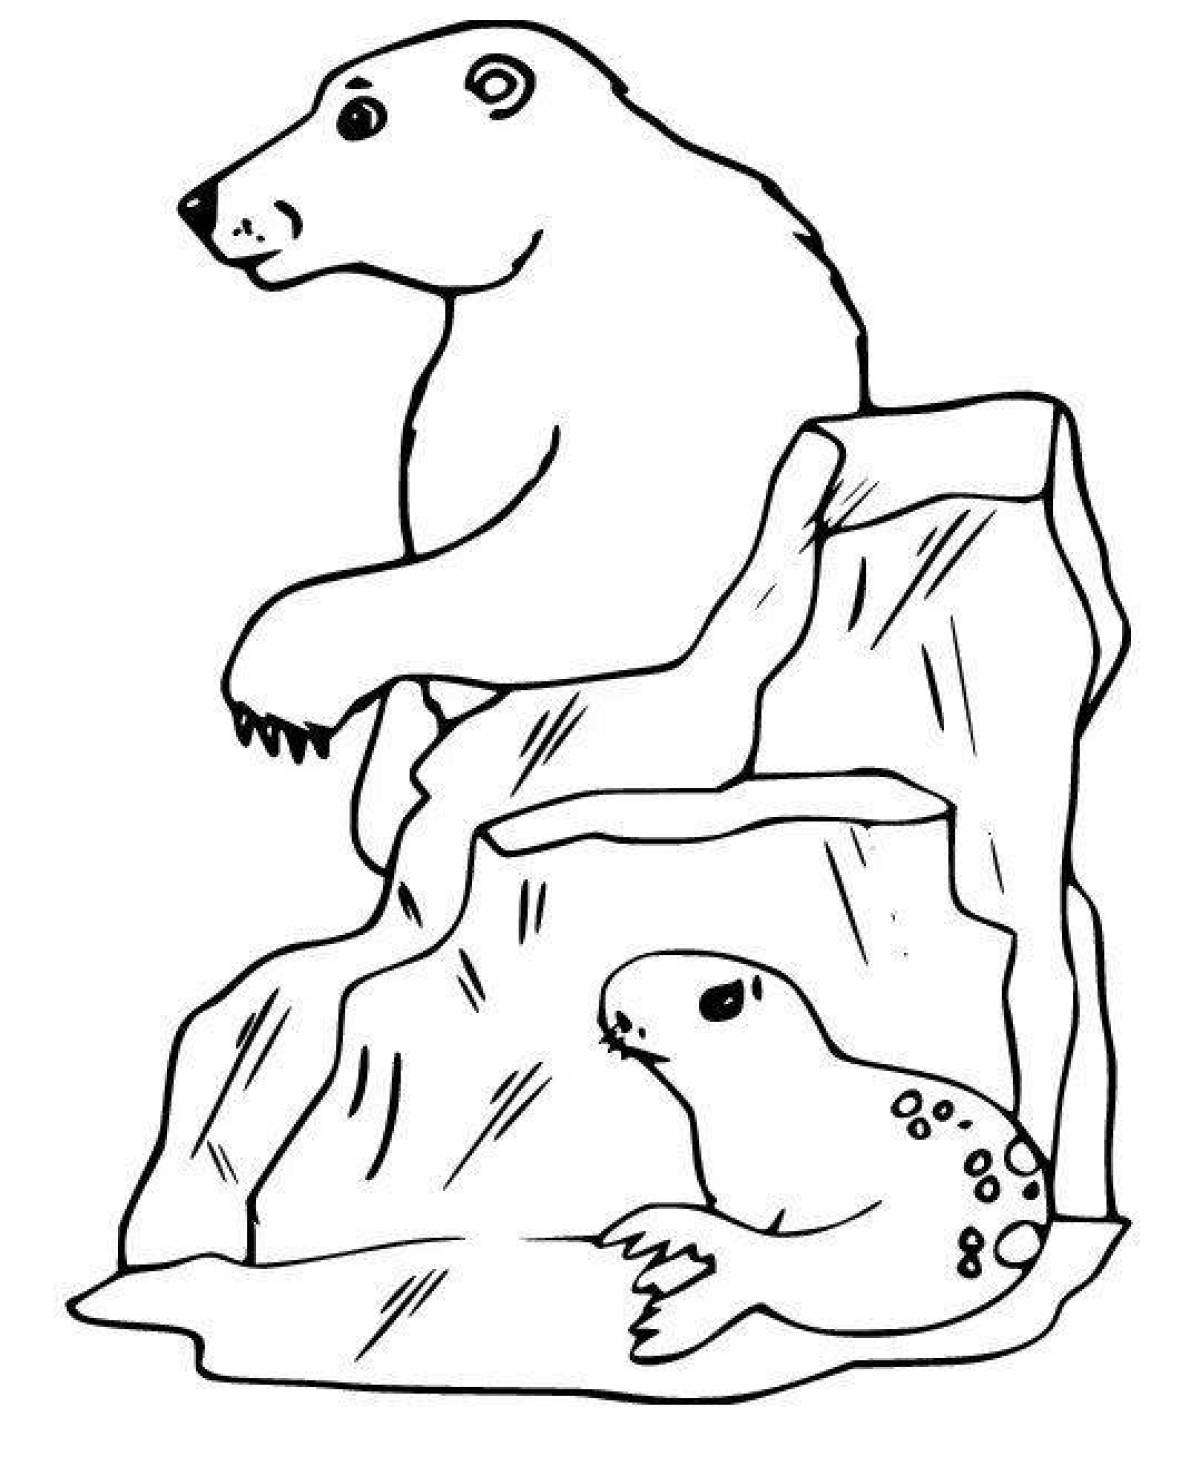 Colouring friendly bear in the north